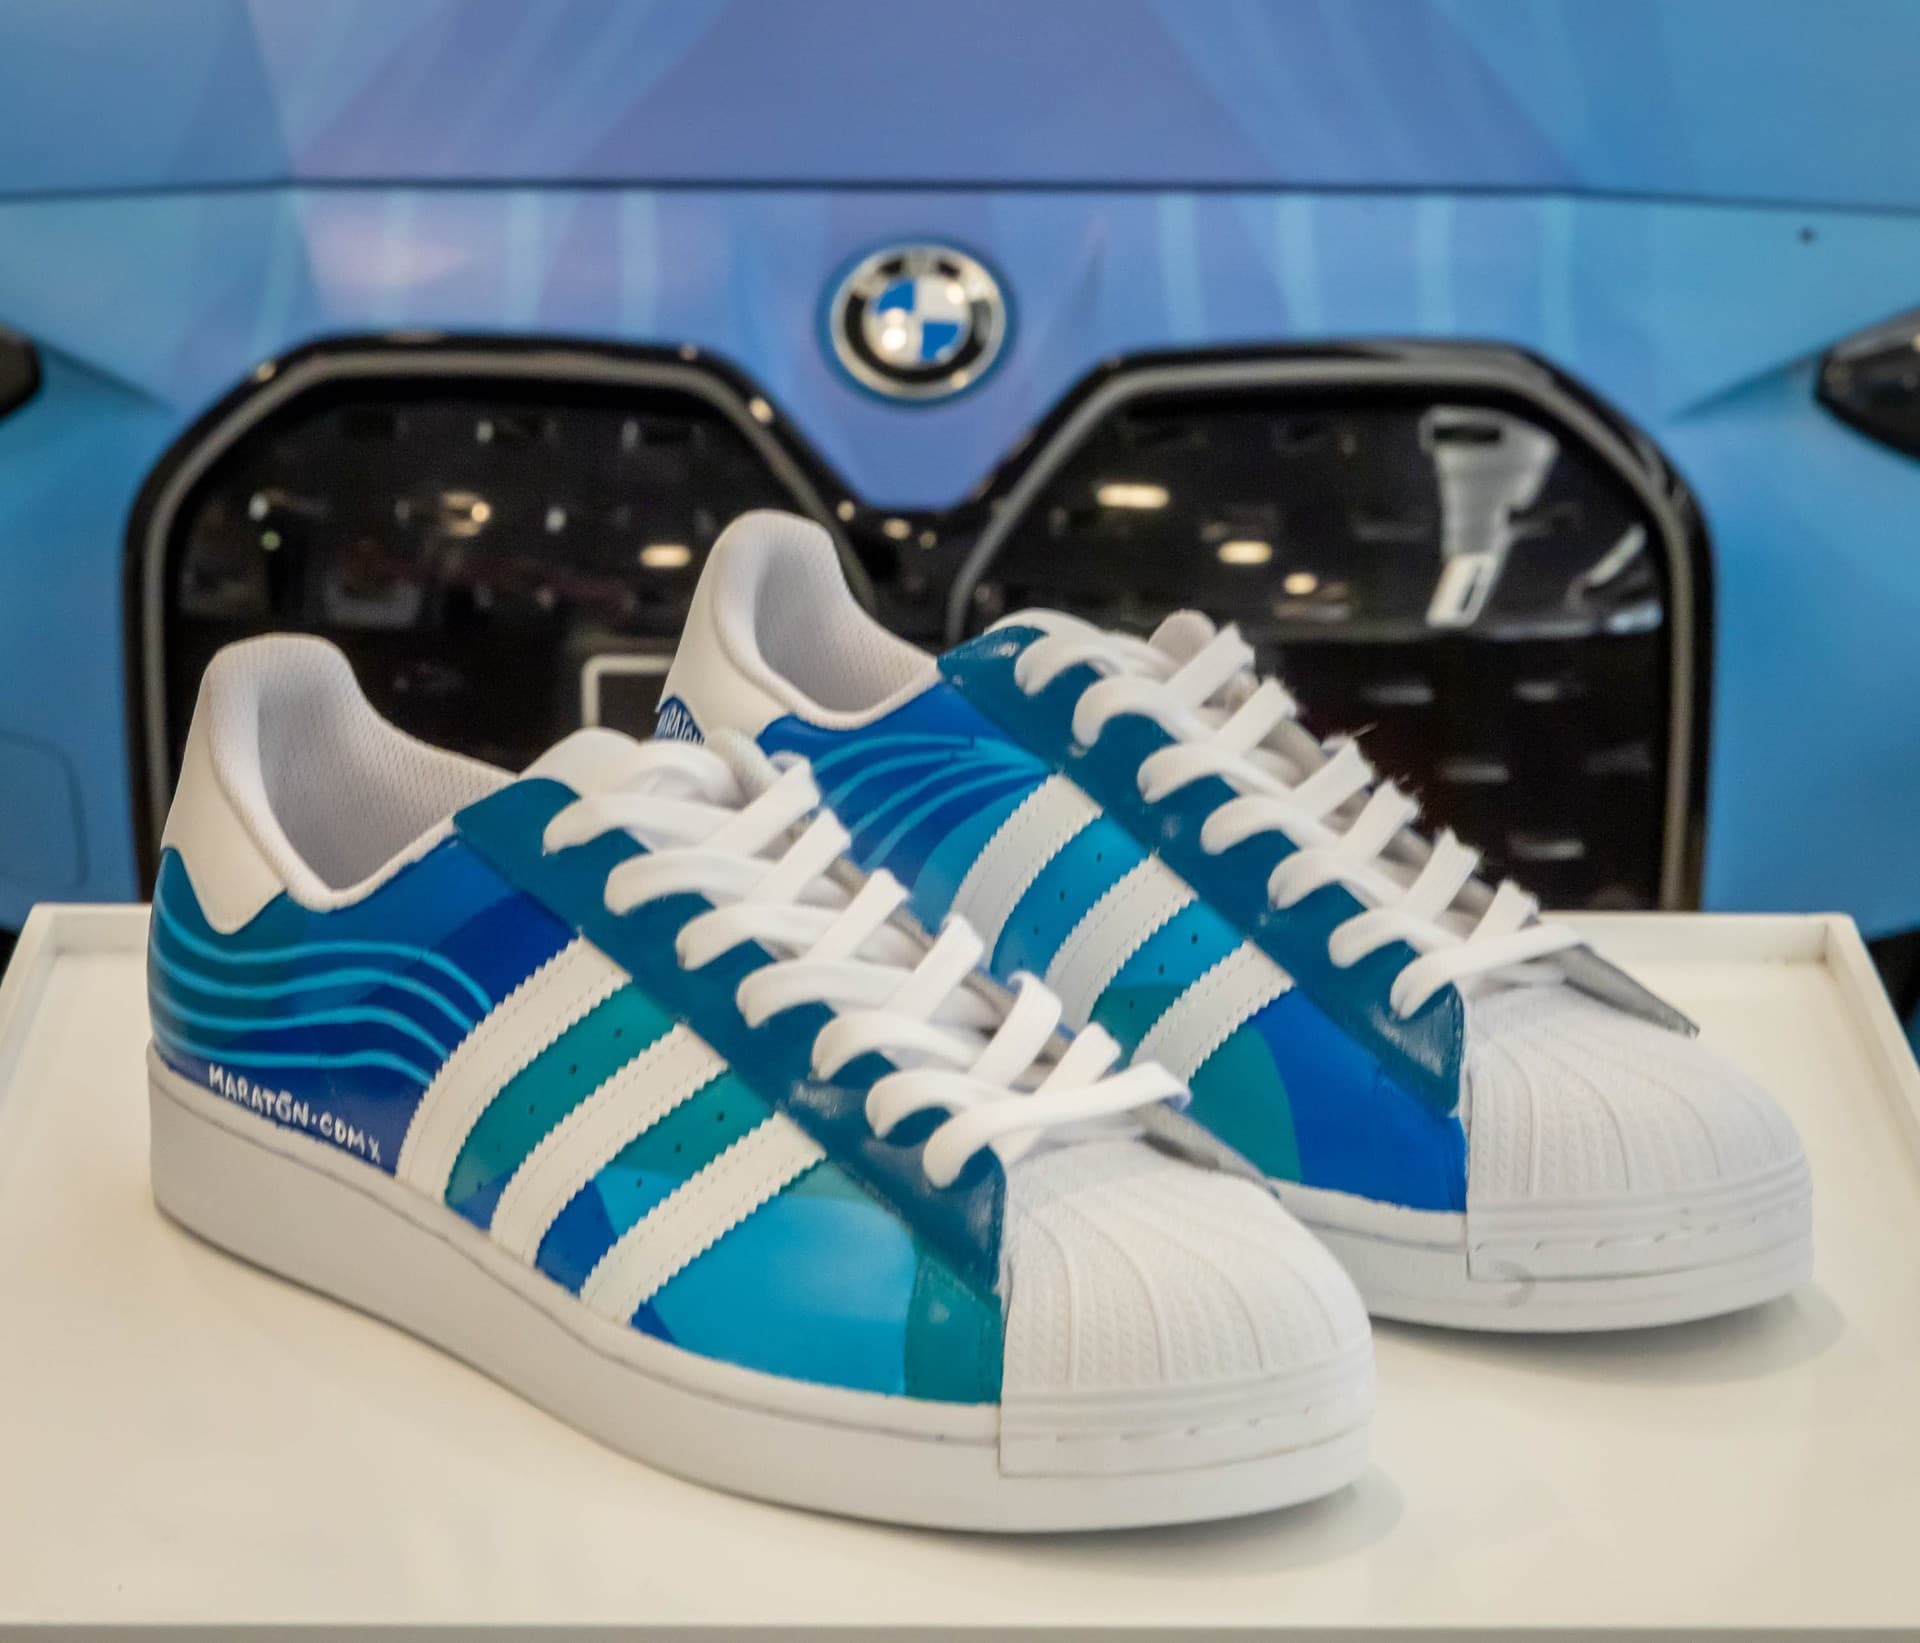 emulsion Collecting leaves Specificity BMW x Adidas releases limited edition Superstar tennis sneakers